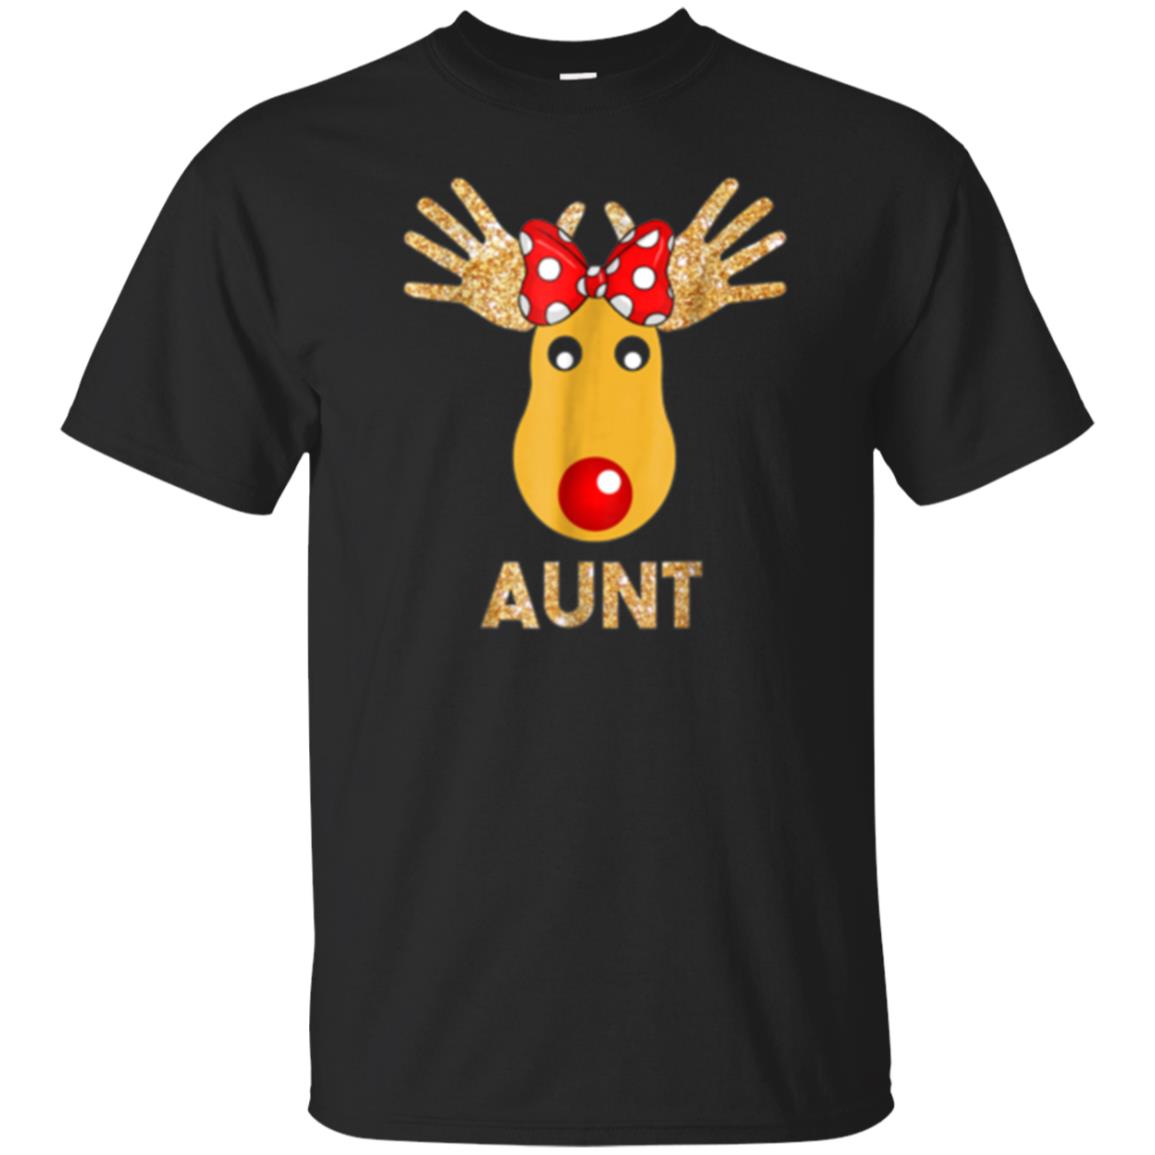 Aunt Deer Funny Matching Family Christmas T Shirt